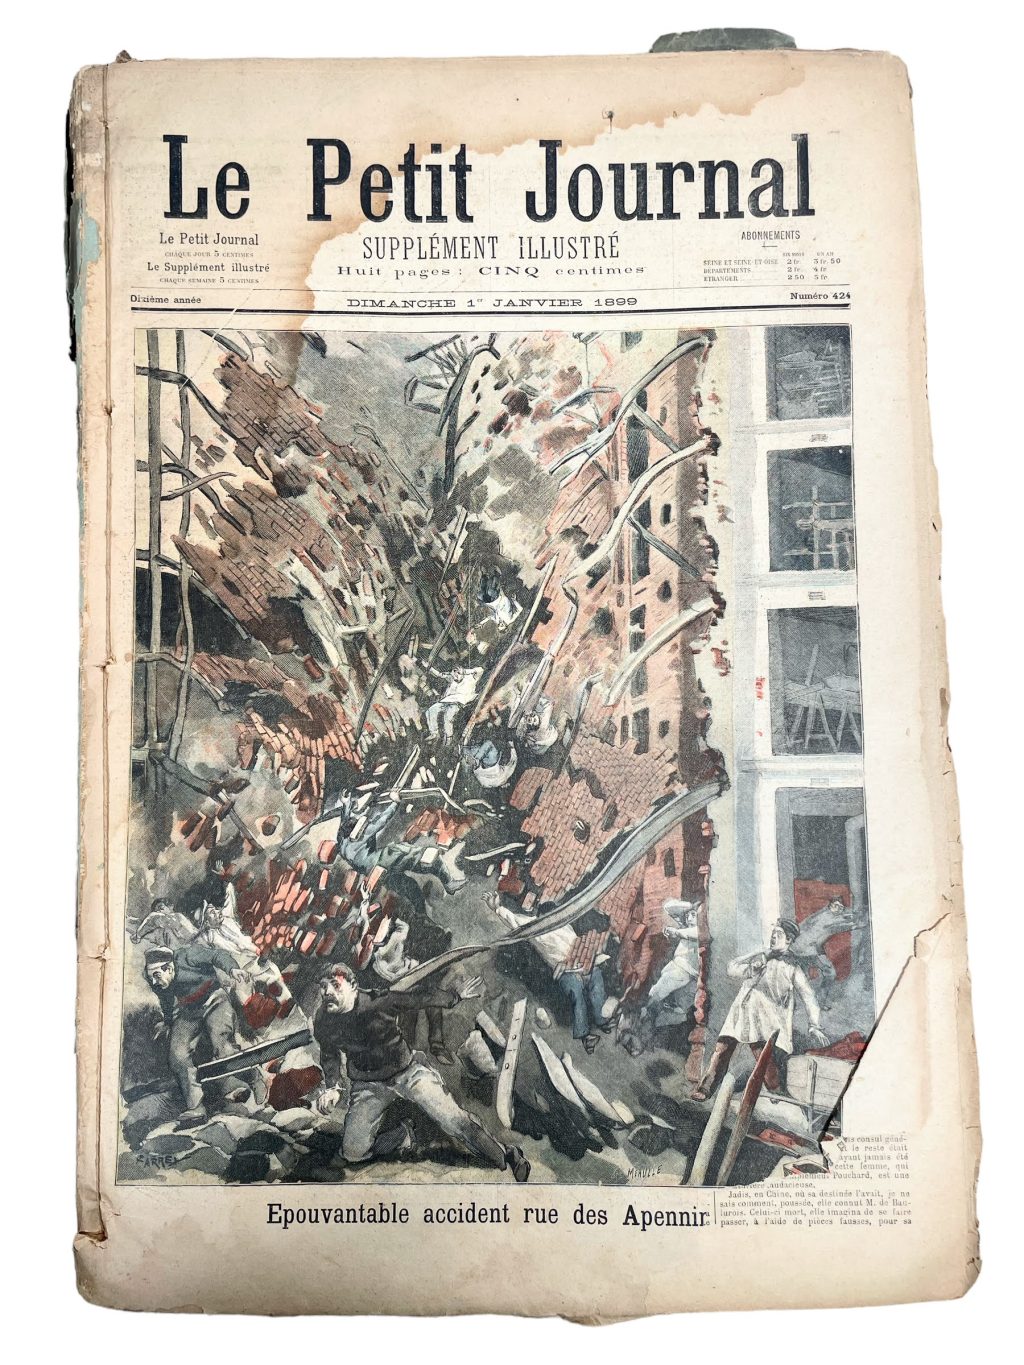 Antique French Job Lot Le Petit Journal Newspaper Supplement Illustre Number 424 to 476 Illustrations 8 Pages Per Edition Year 1899